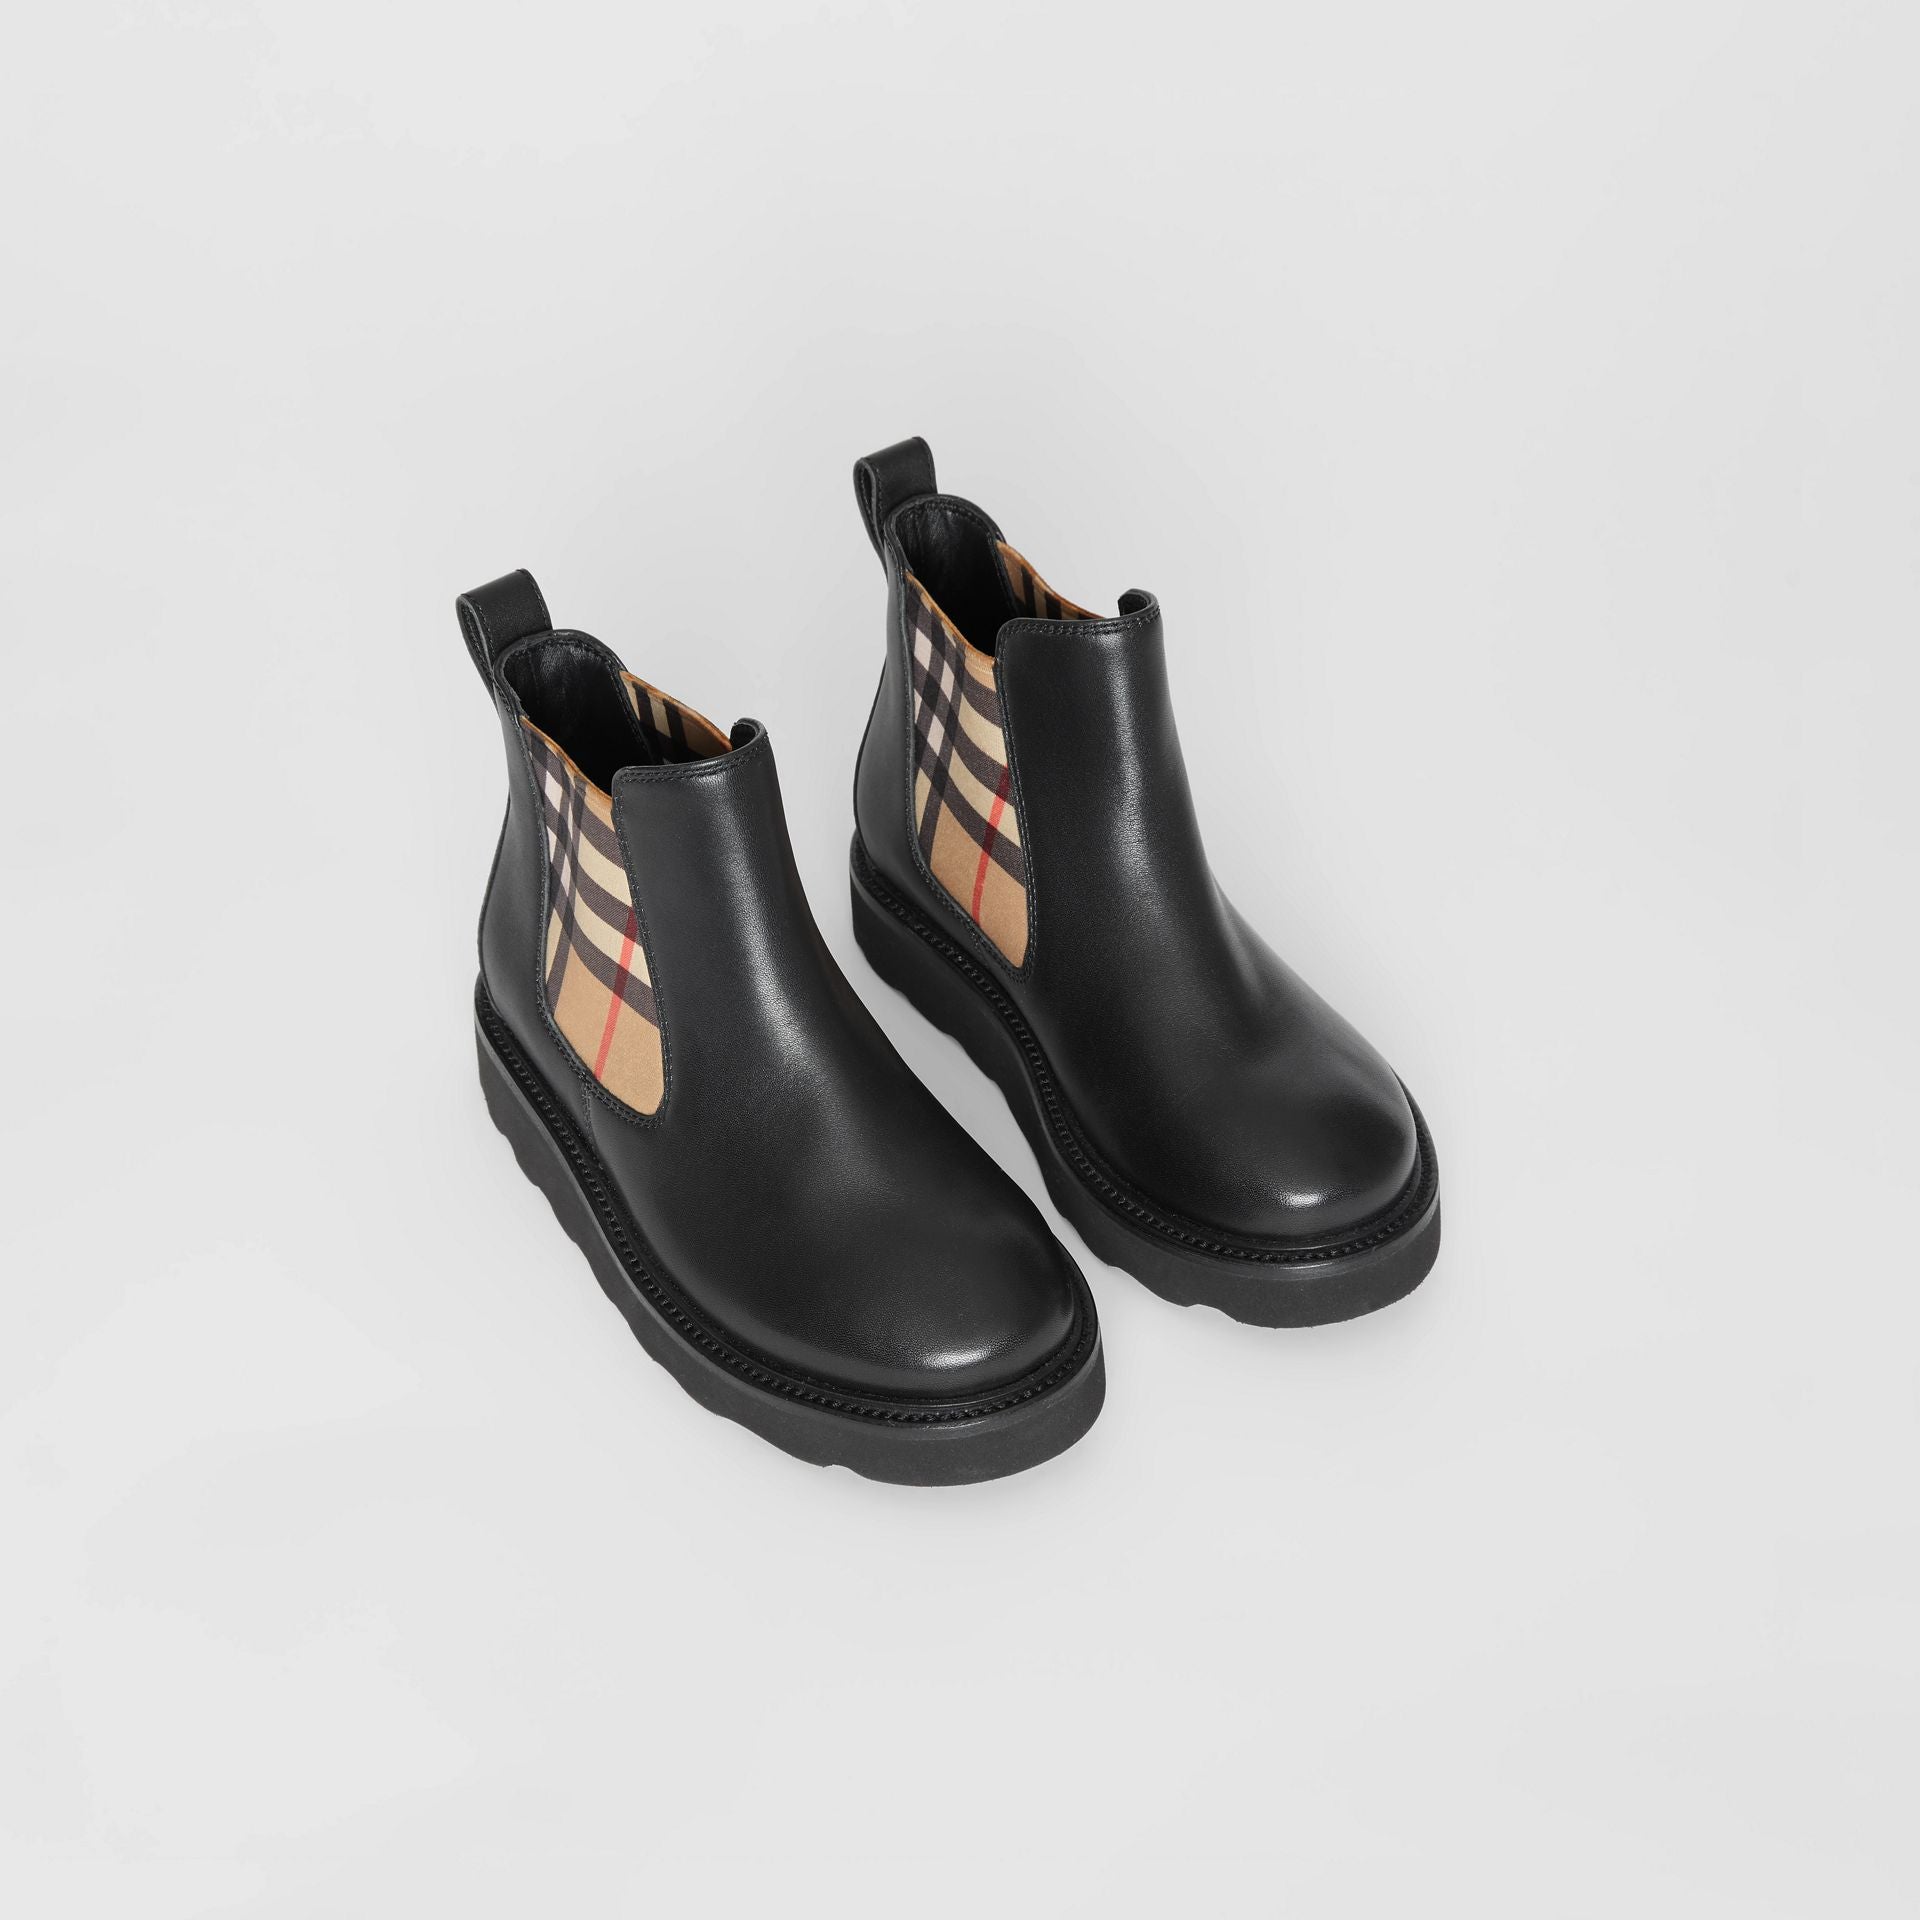 Girls Black Leather Shoes